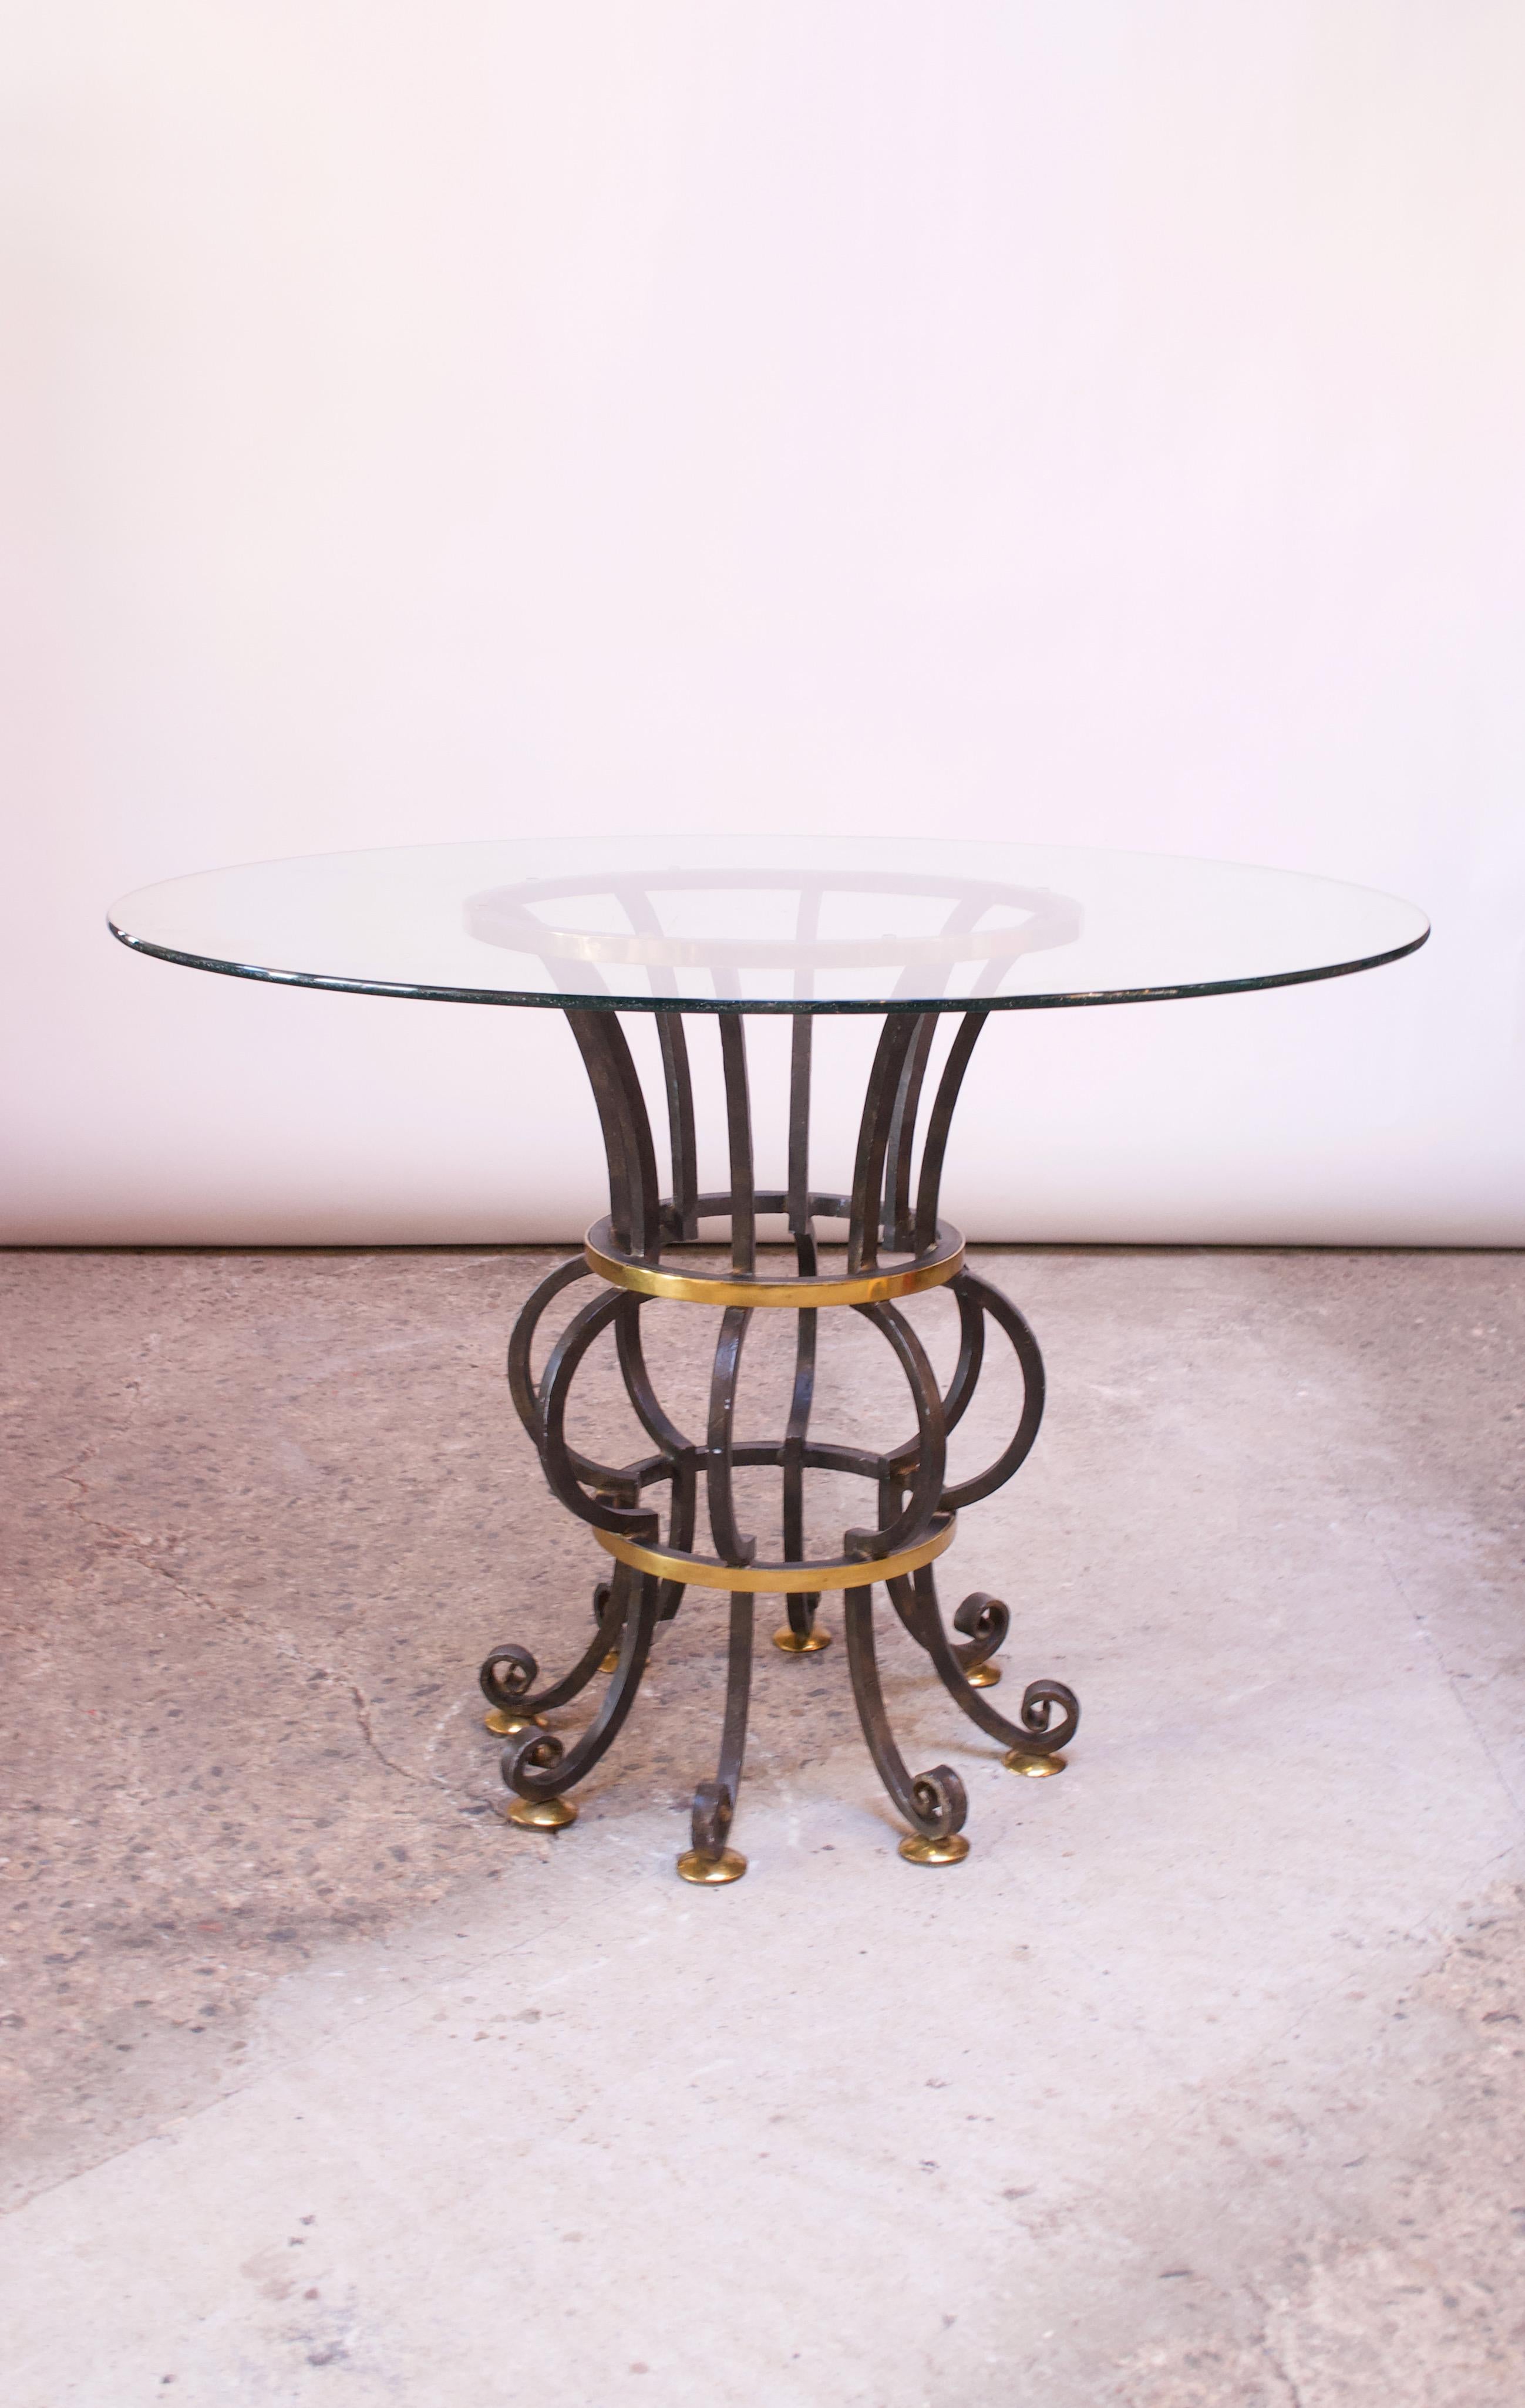 This unique table, comprised of bent / painted steel and brass, was handmade in the Philippines for Lineage Home Furnishings Inc. of North Carolina. The glass top shows wear (scratches from use), but the base is in good, vintage condition. The base